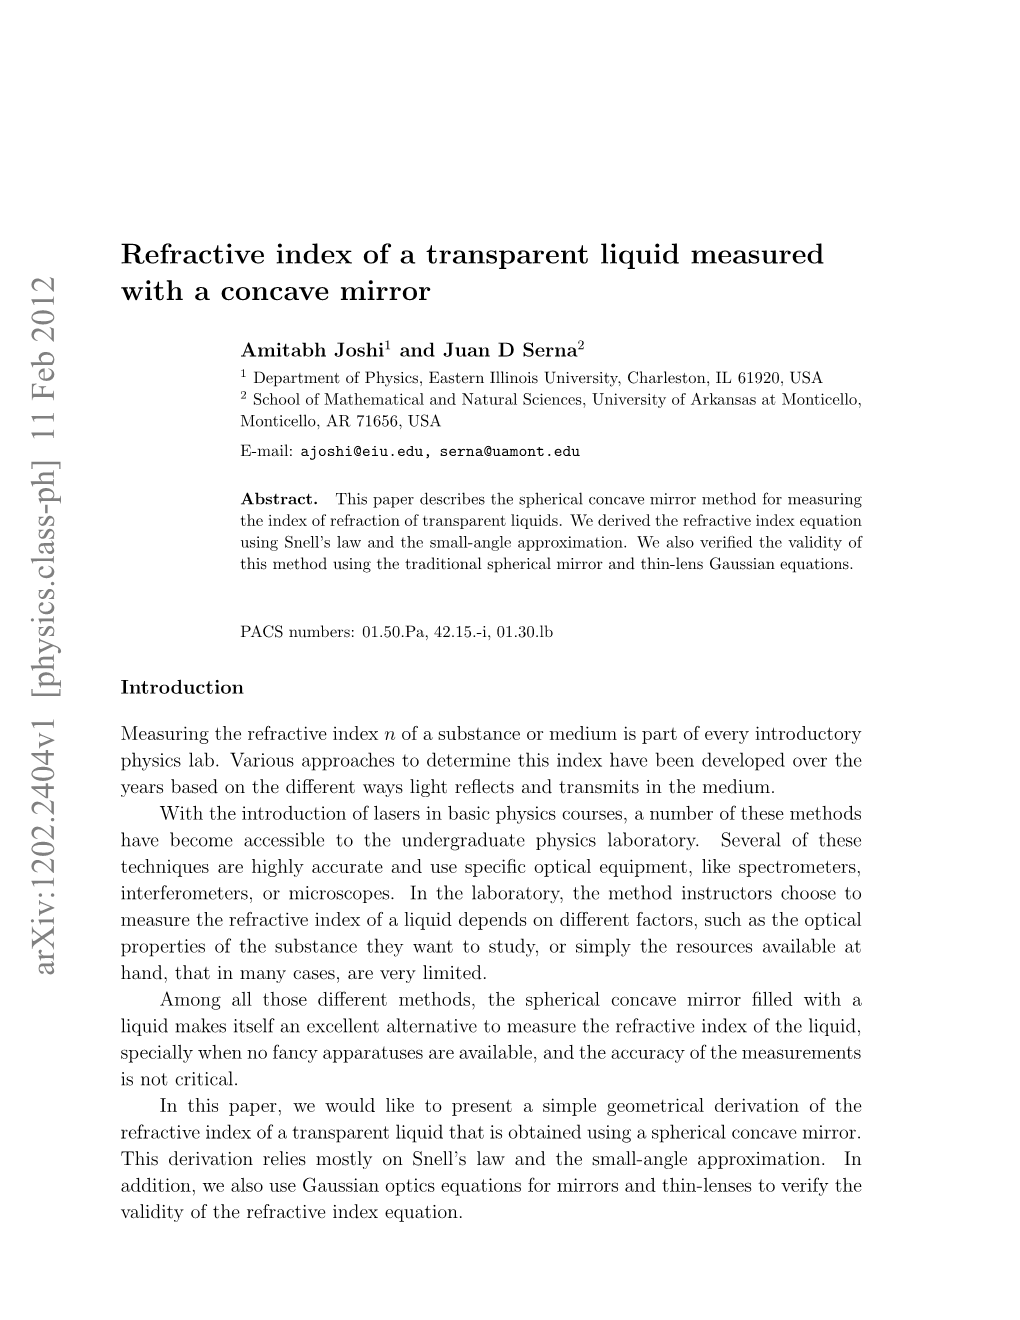 Refractive Index of a Transparent Liquid Measured with a Concave Mirror 2